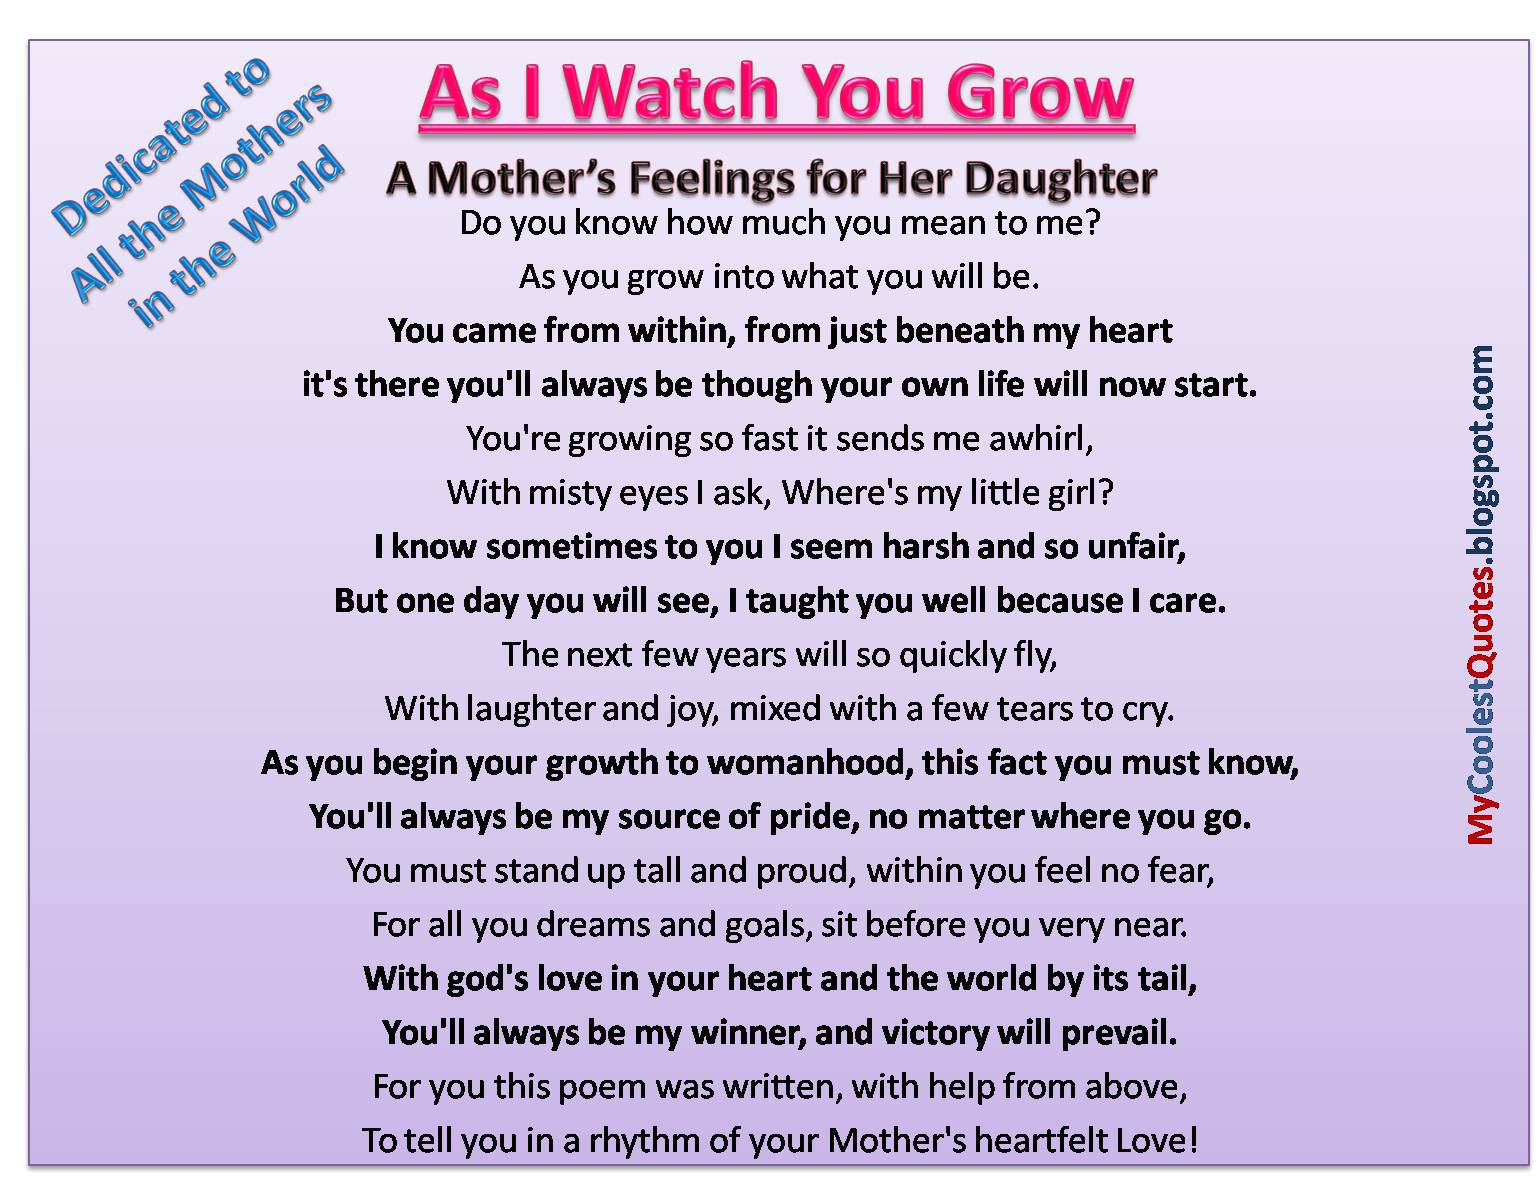 Quotes On Mothers Love
 My Coolest Quotes A Mother s Feelings for Her Daughter